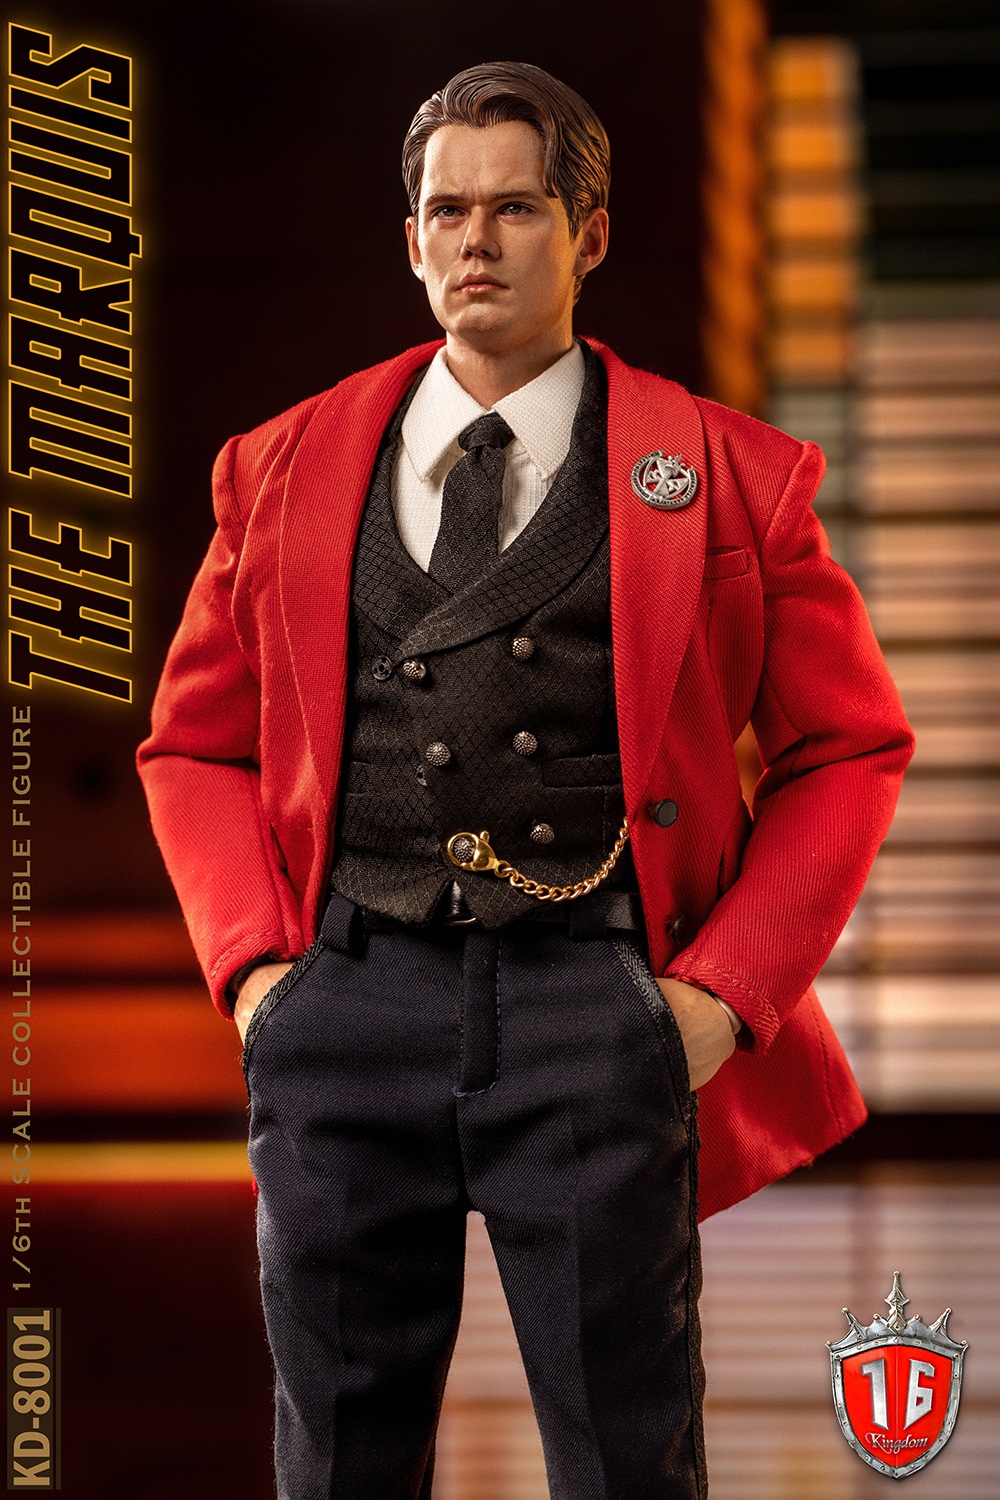 NEW PRODUCT: Kingdom: 1/6 The Marquis Action Figure KD-8001 11390912